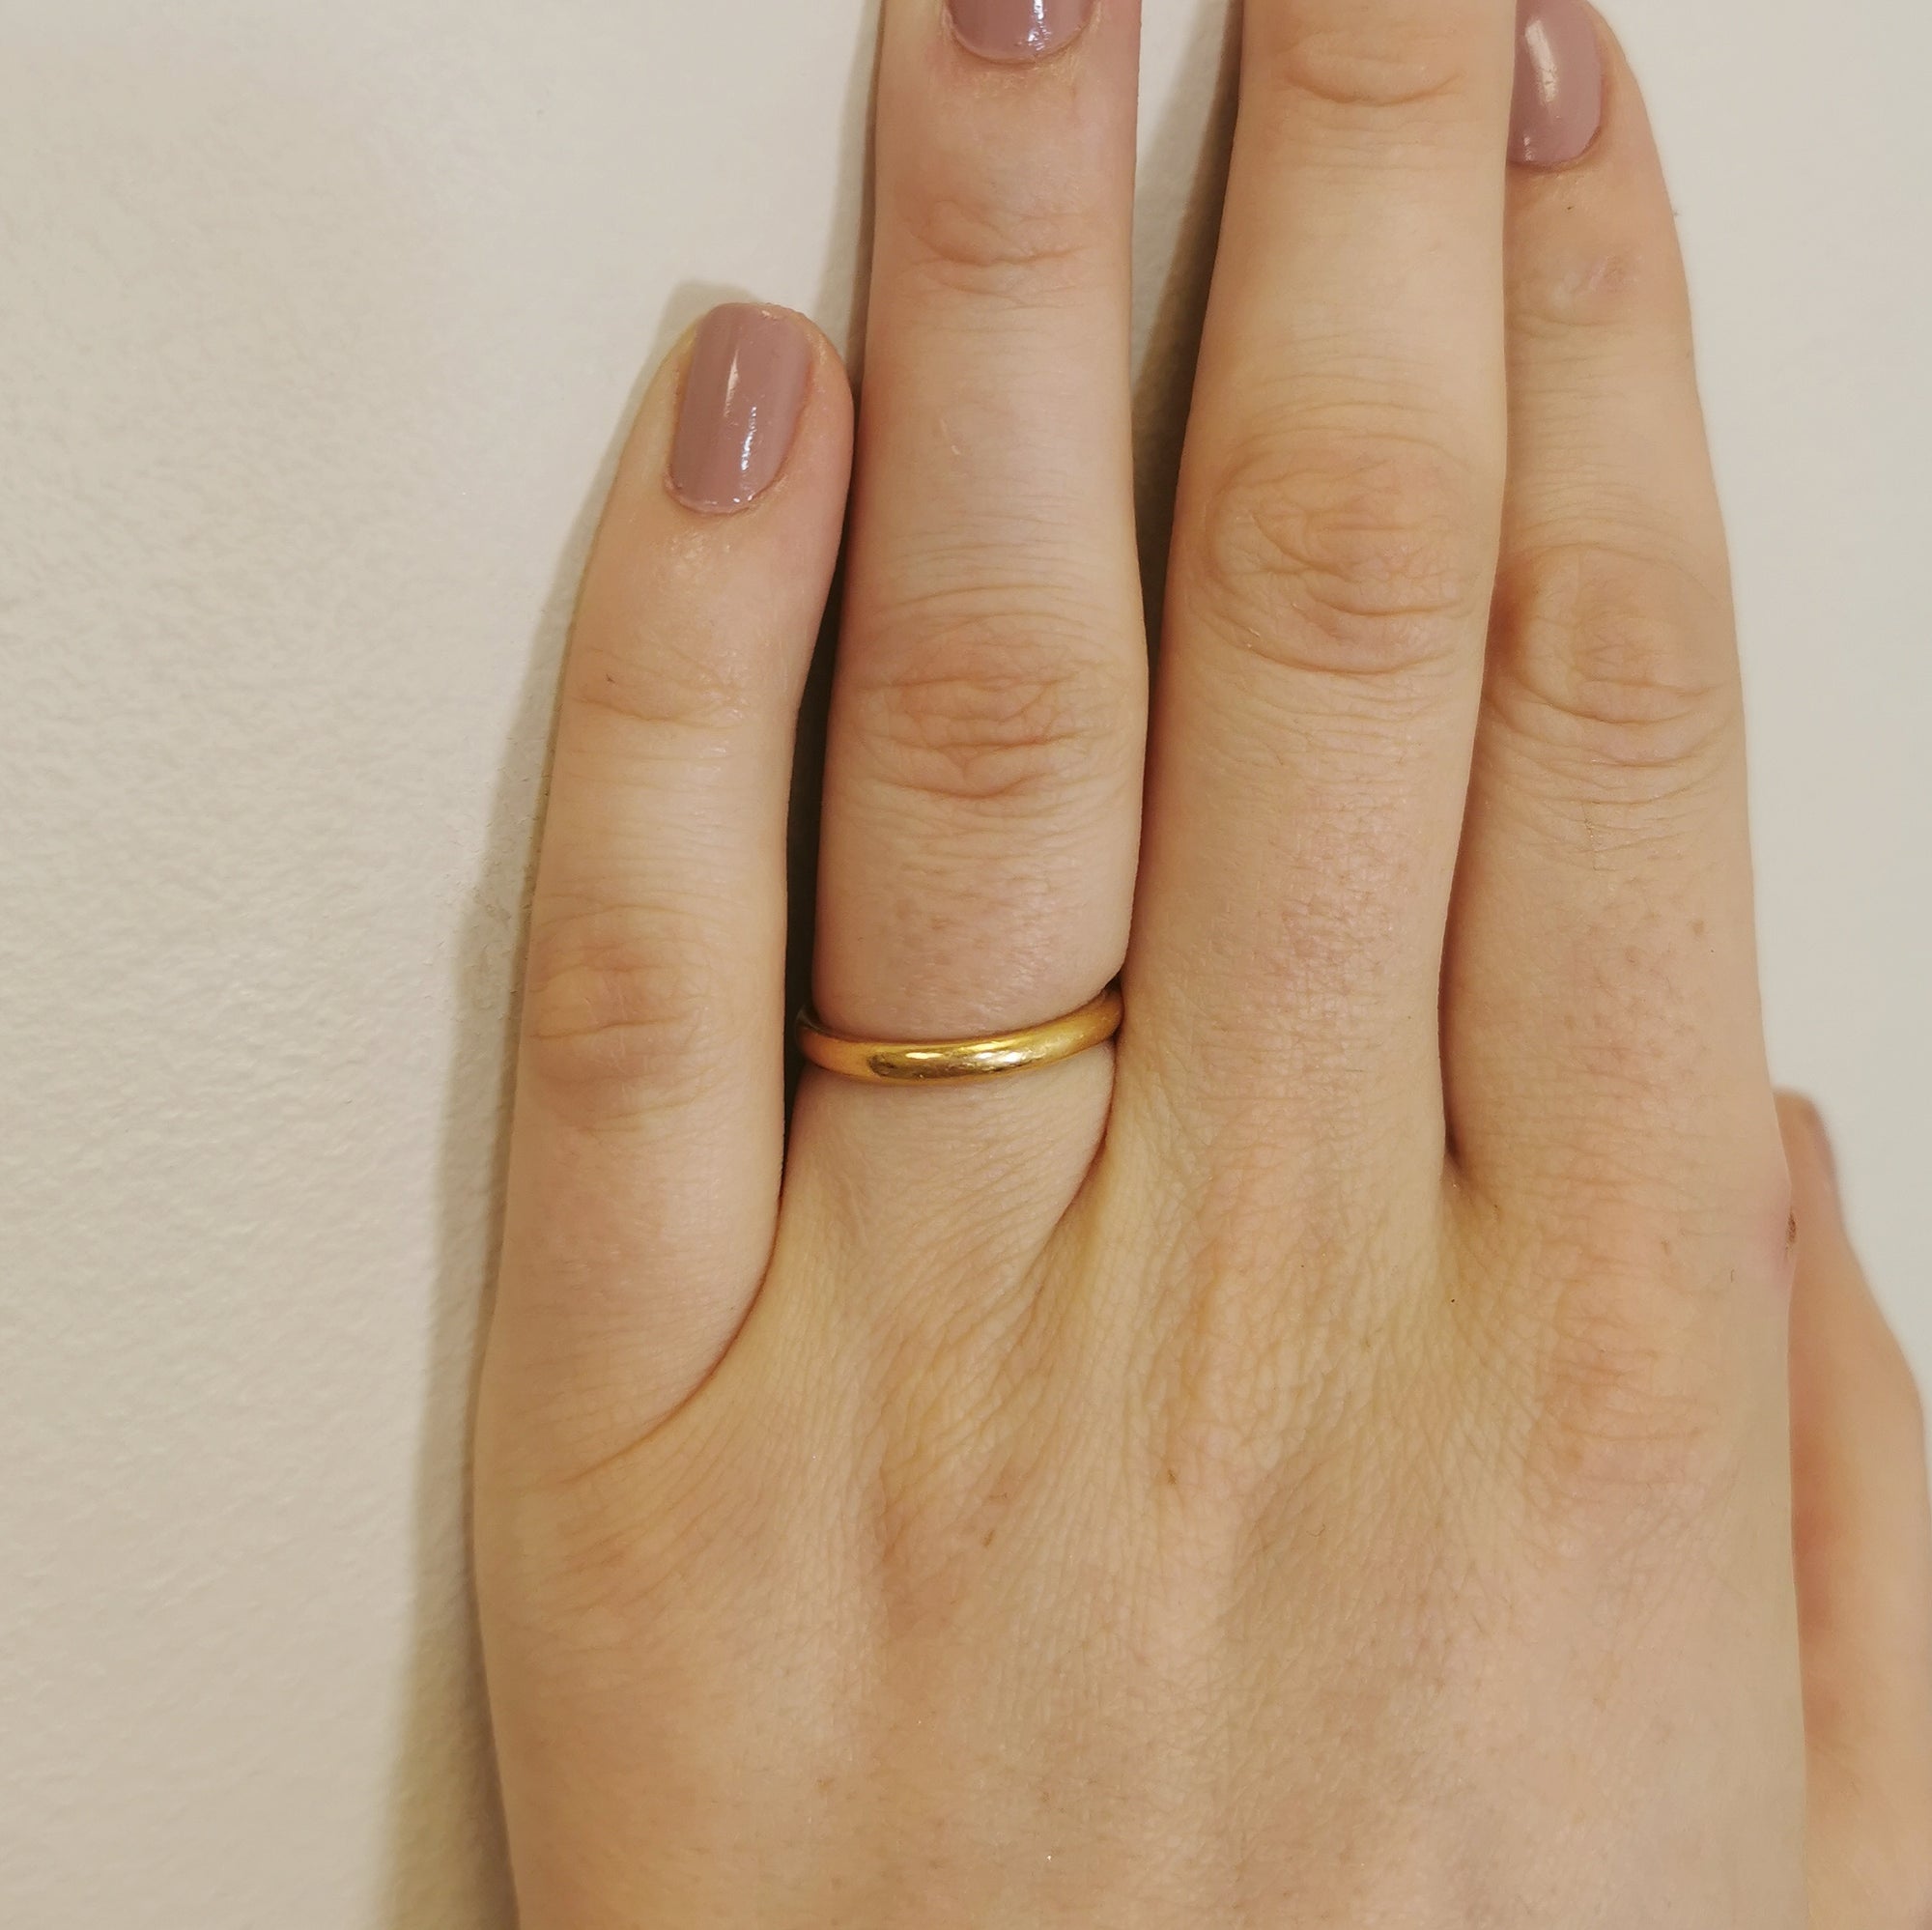 1950s Yellow Gold Band | SZ 6.75 |